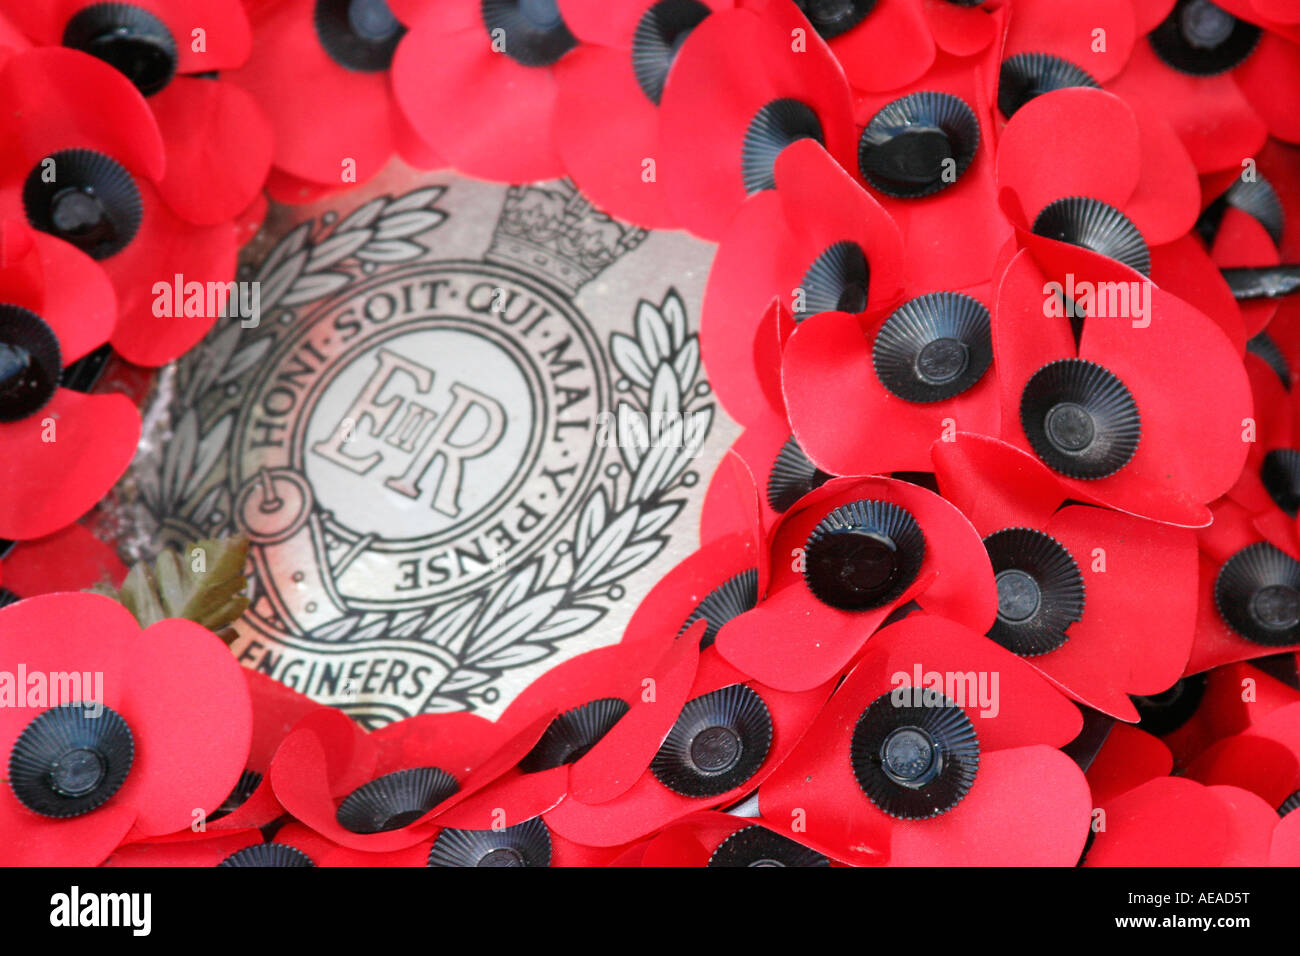 Remembrance day poppy paper poppies wreath 11th November Stock Photo